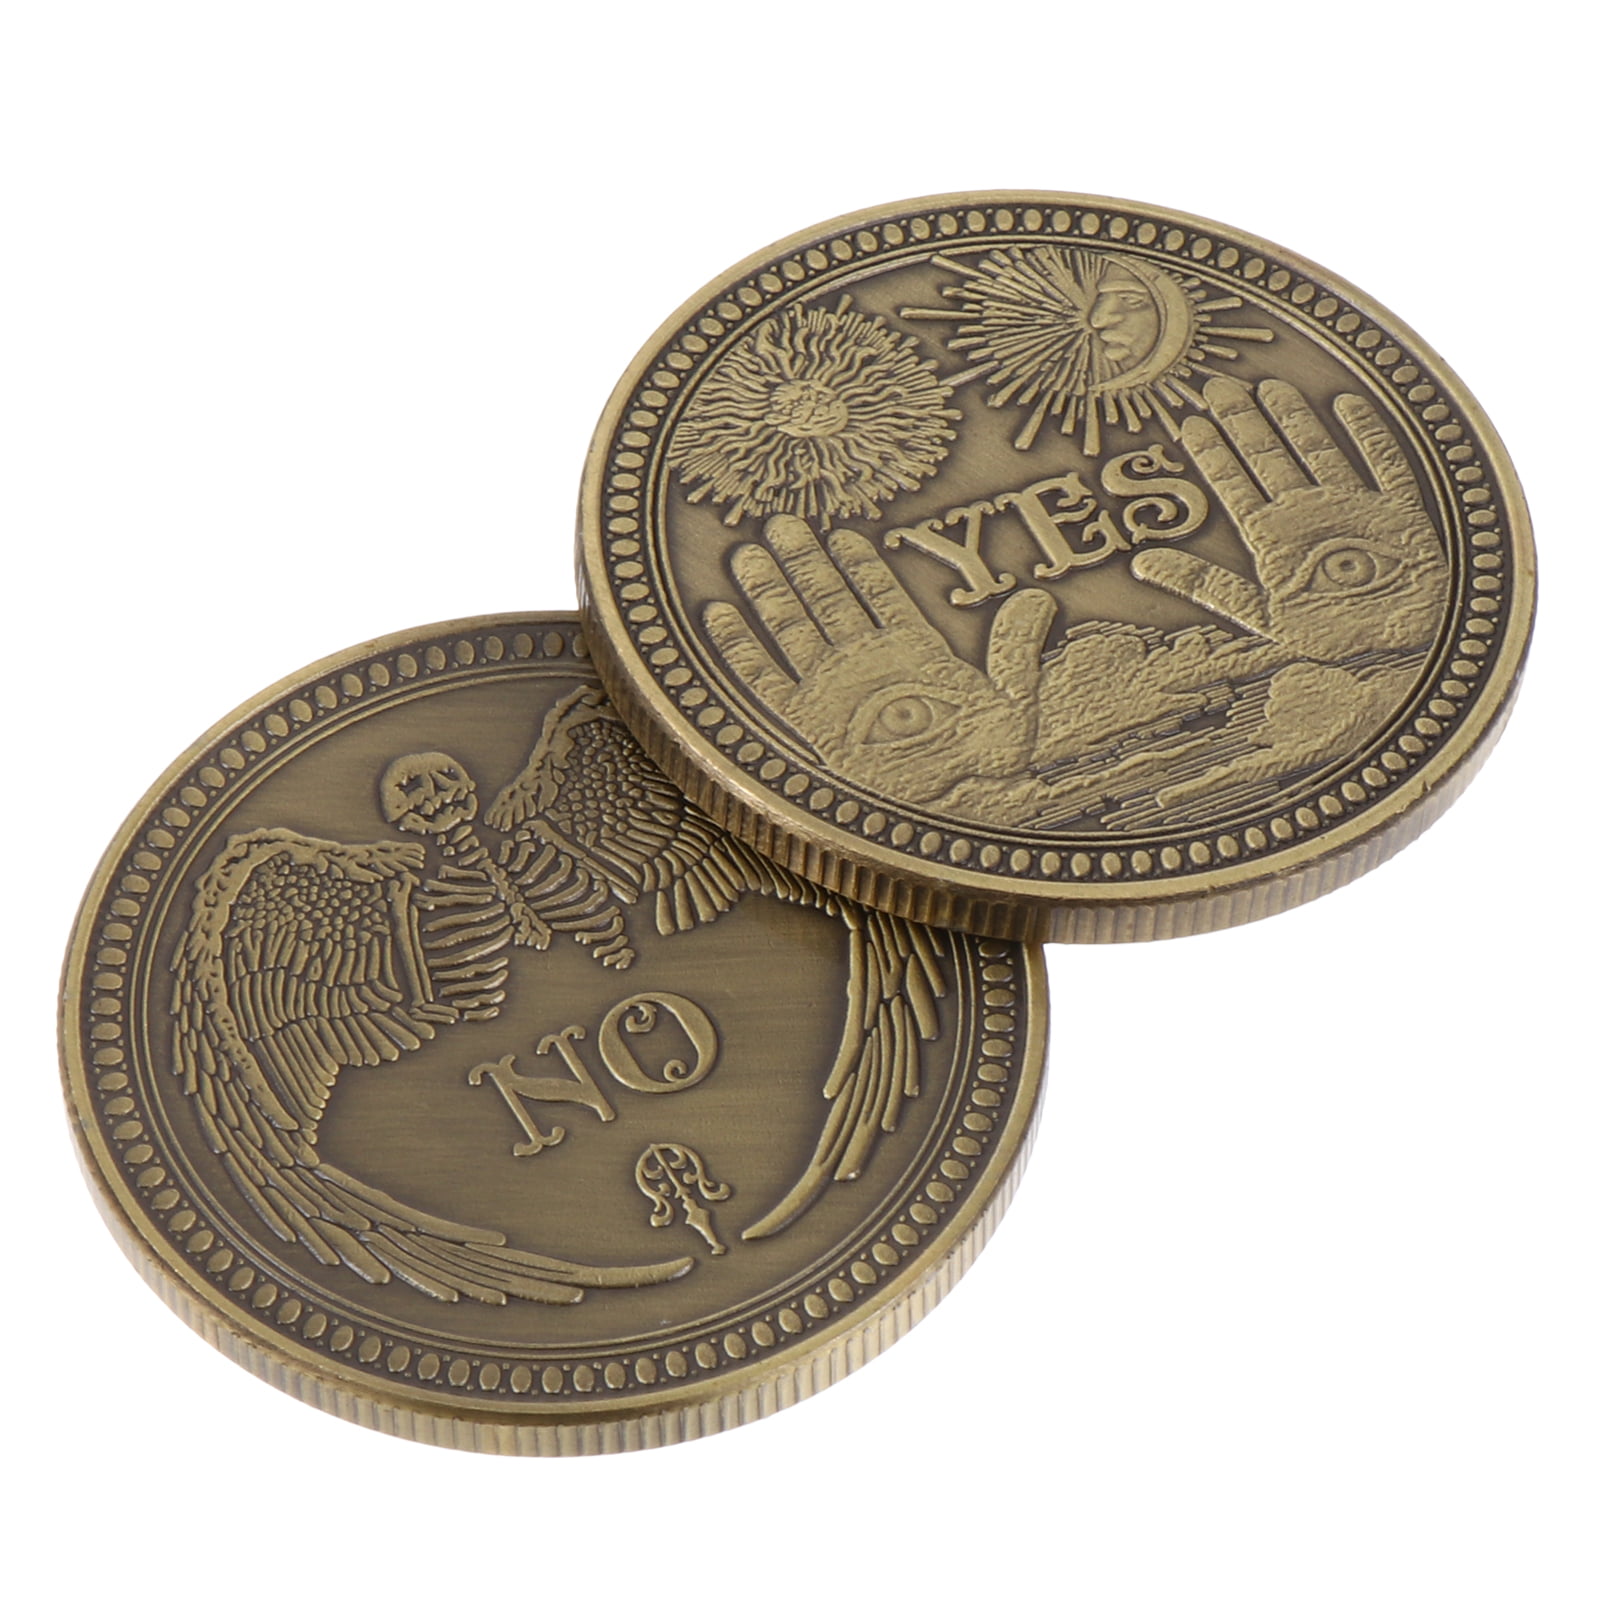 New Bronze Yes or No Decision Commemorative Coin Souvenir Collection Craft Gifts 